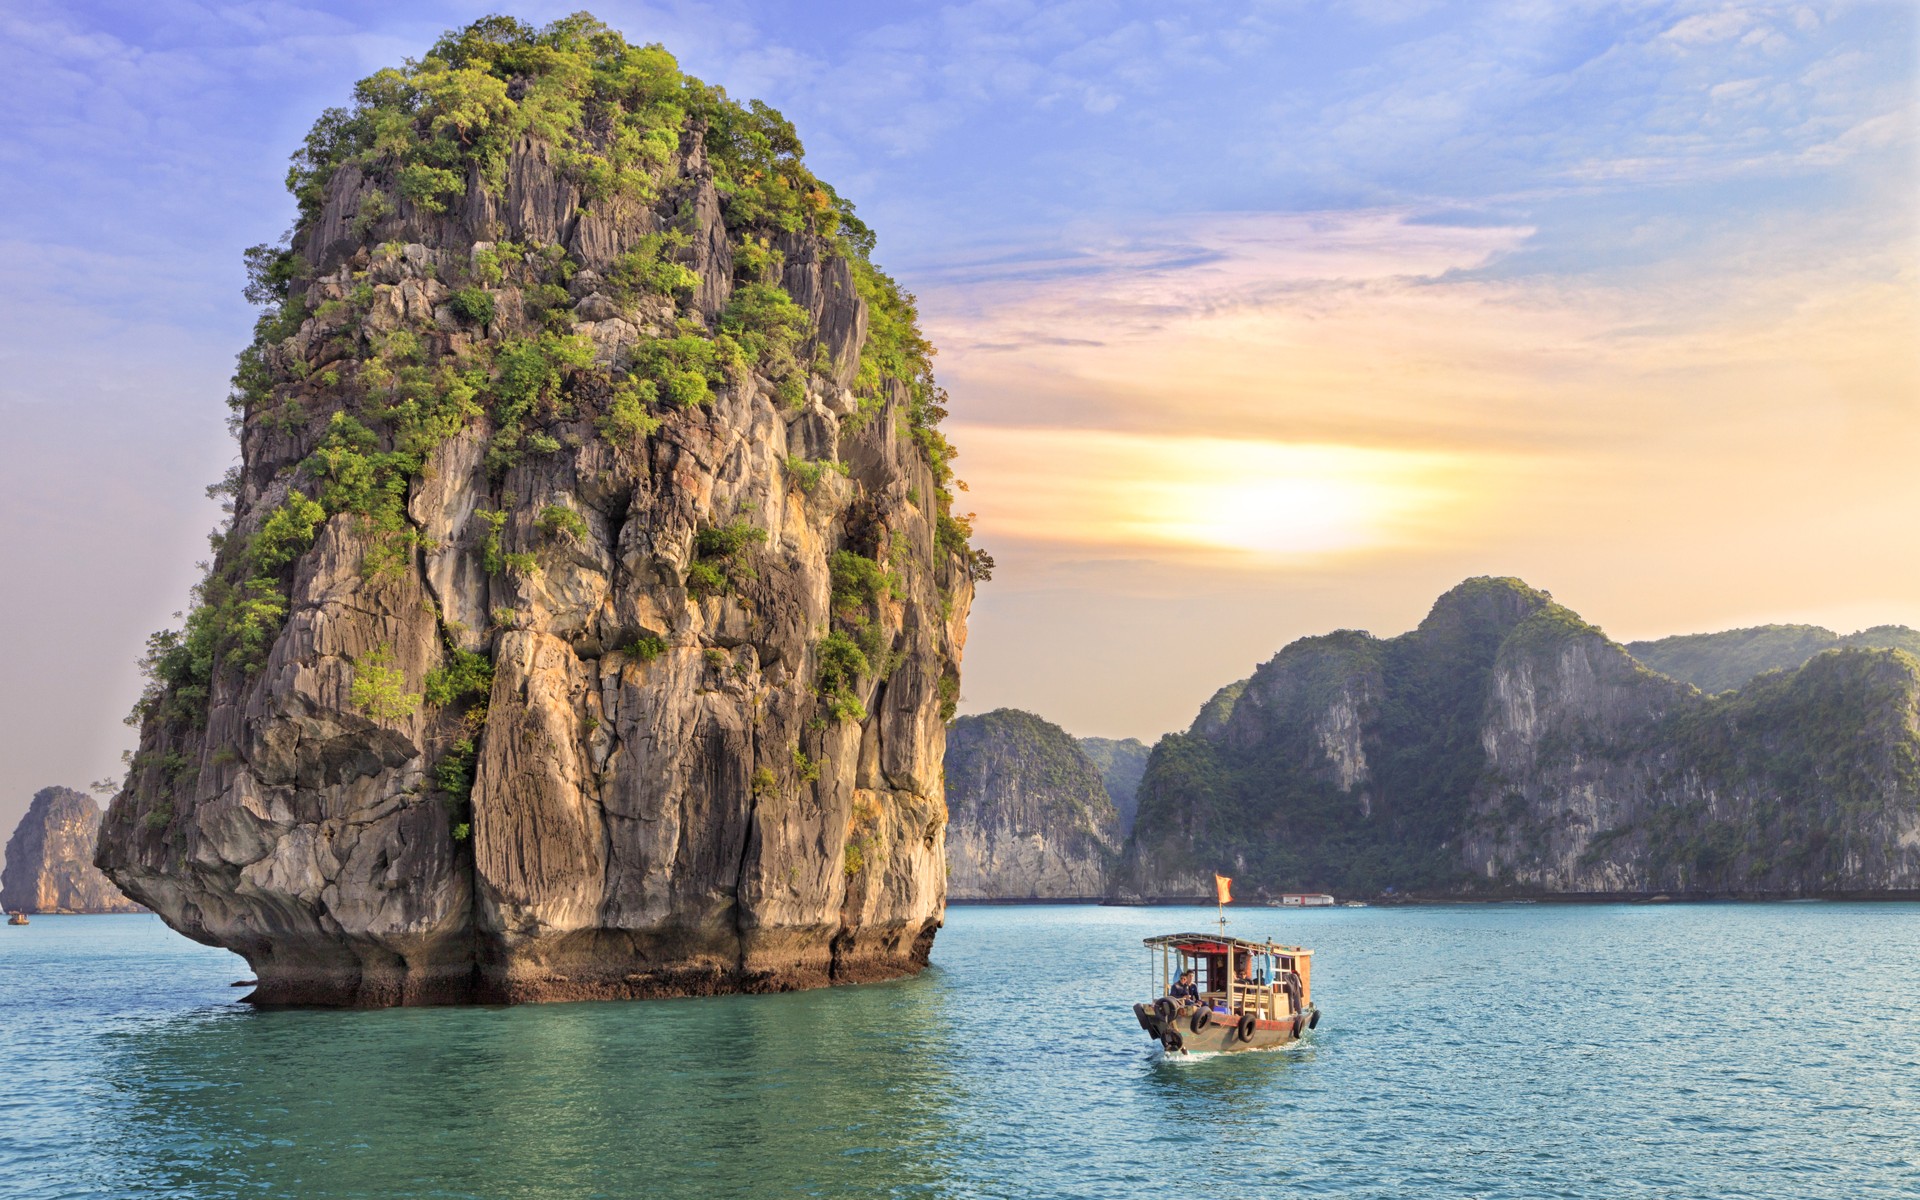 Dive into a world of emerald waters, majestic limestone cliffs, and breathtaking sunsets with our unforgettable Halong Bay tours